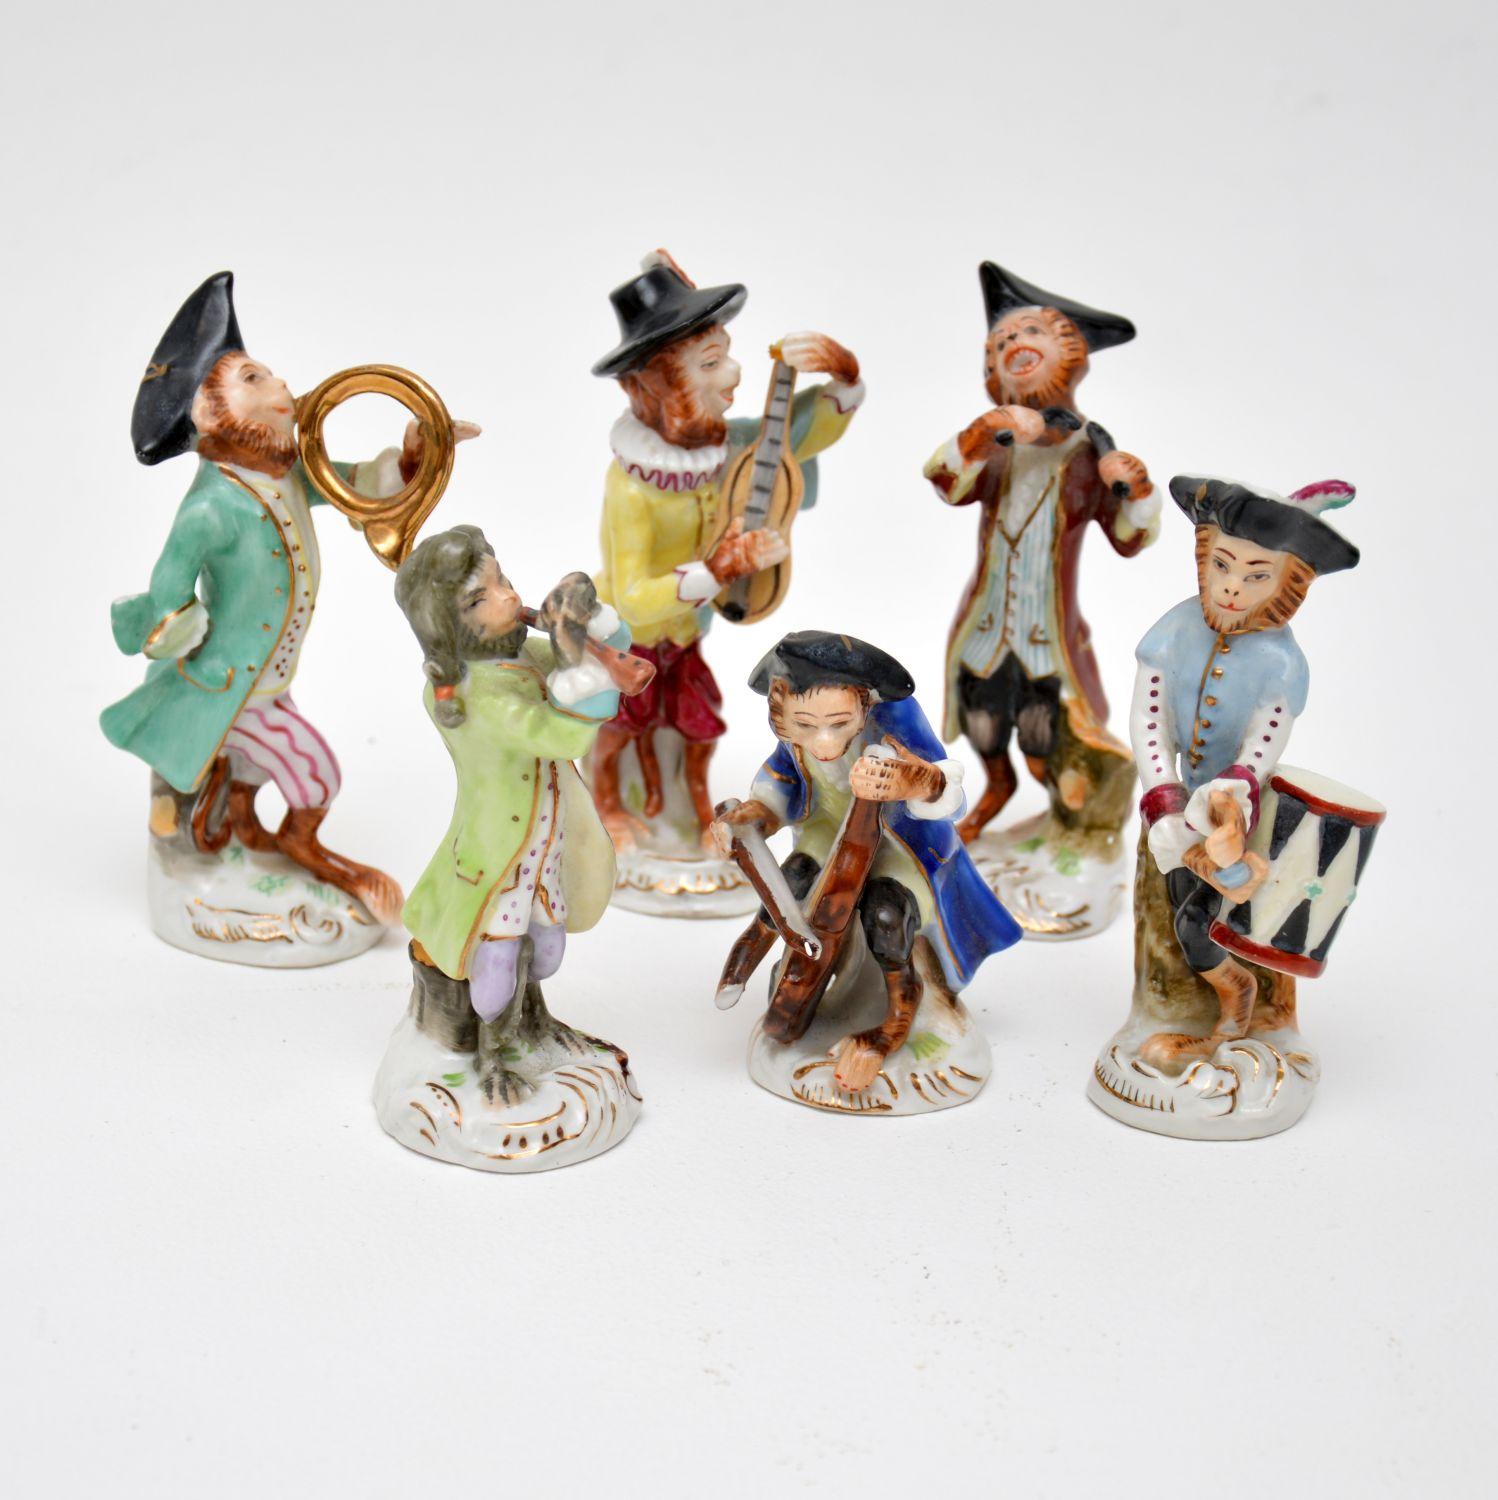 A whimsical and very beautifully made collection of German monkey band porcelain figurines. These are very much in the style of Meissen and Dresden pottery, they are unmarked but were likely made in Germany in the late 19th century.

The quality